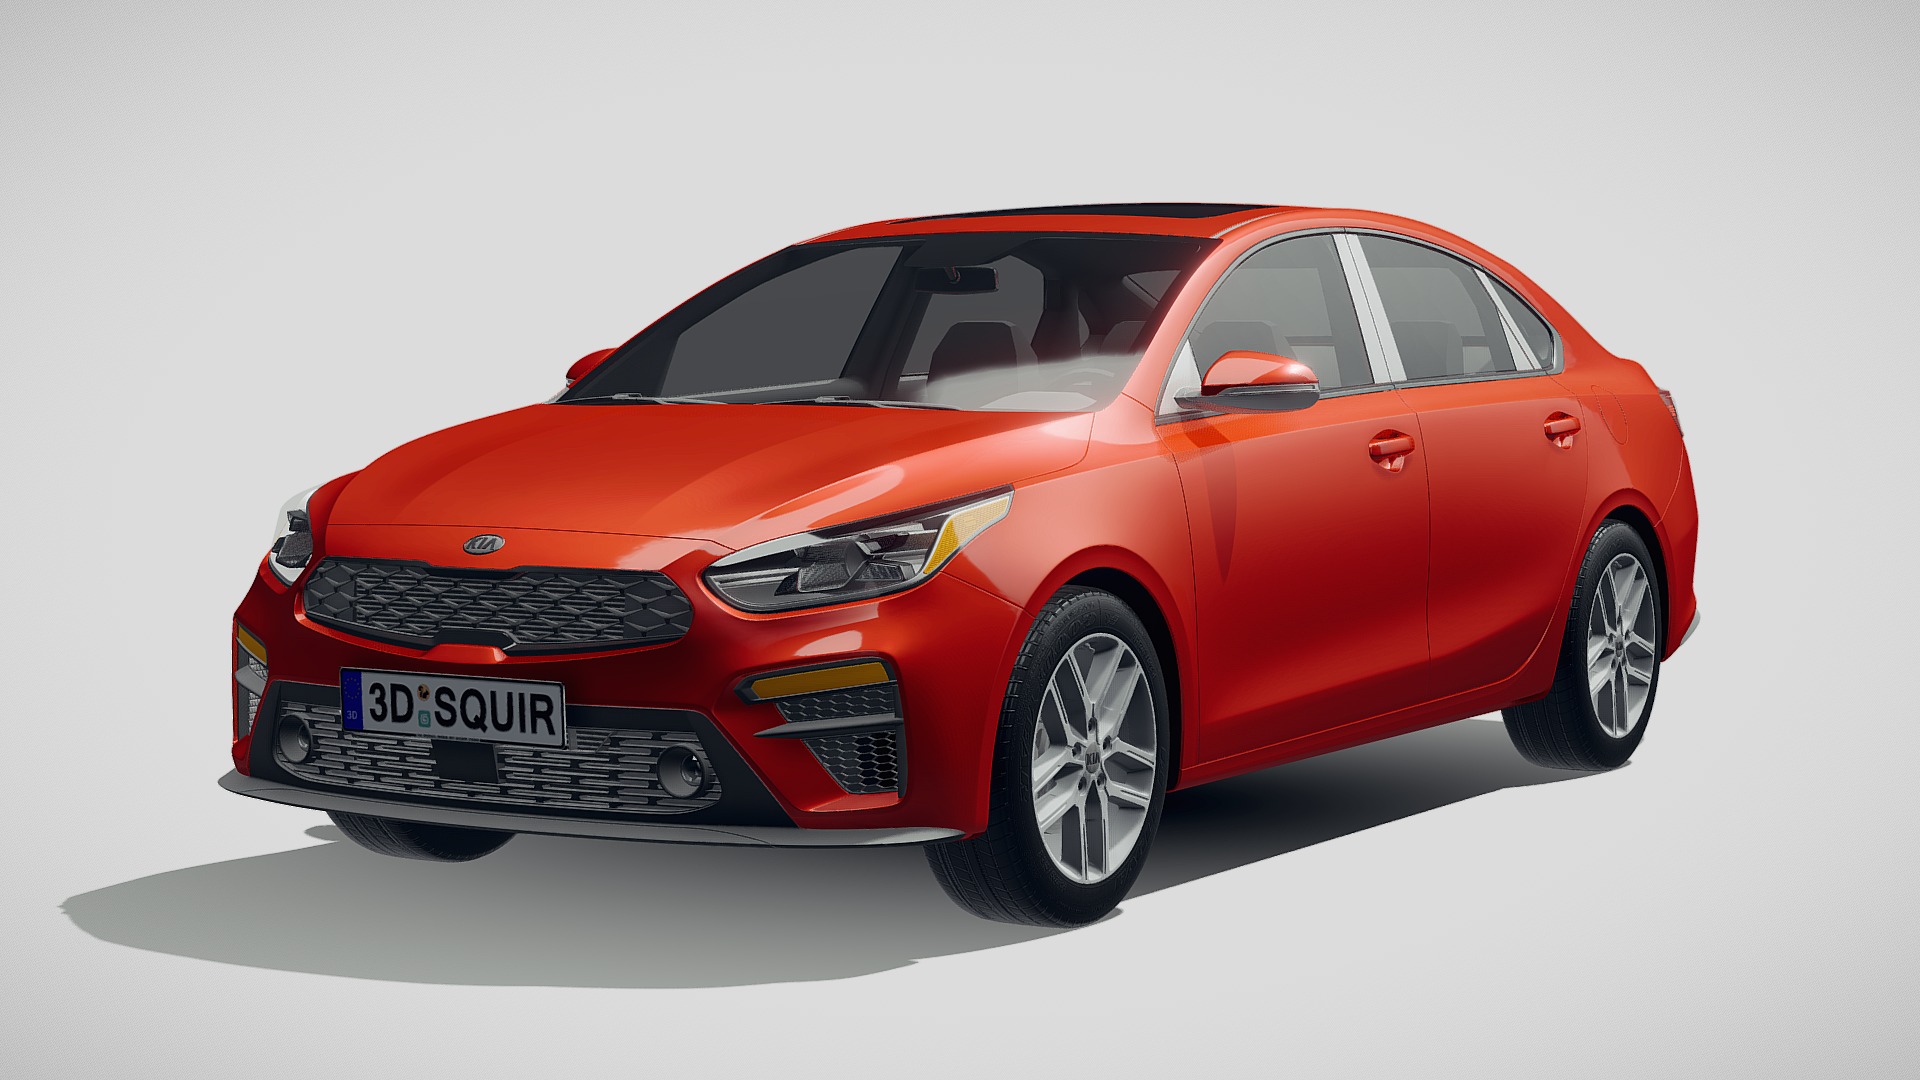 3D model Kia Forte 2019 - This is a 3D model of the Kia Forte 2019. The 3D model is about a red car with a white background with Holden Arboretum in the background.